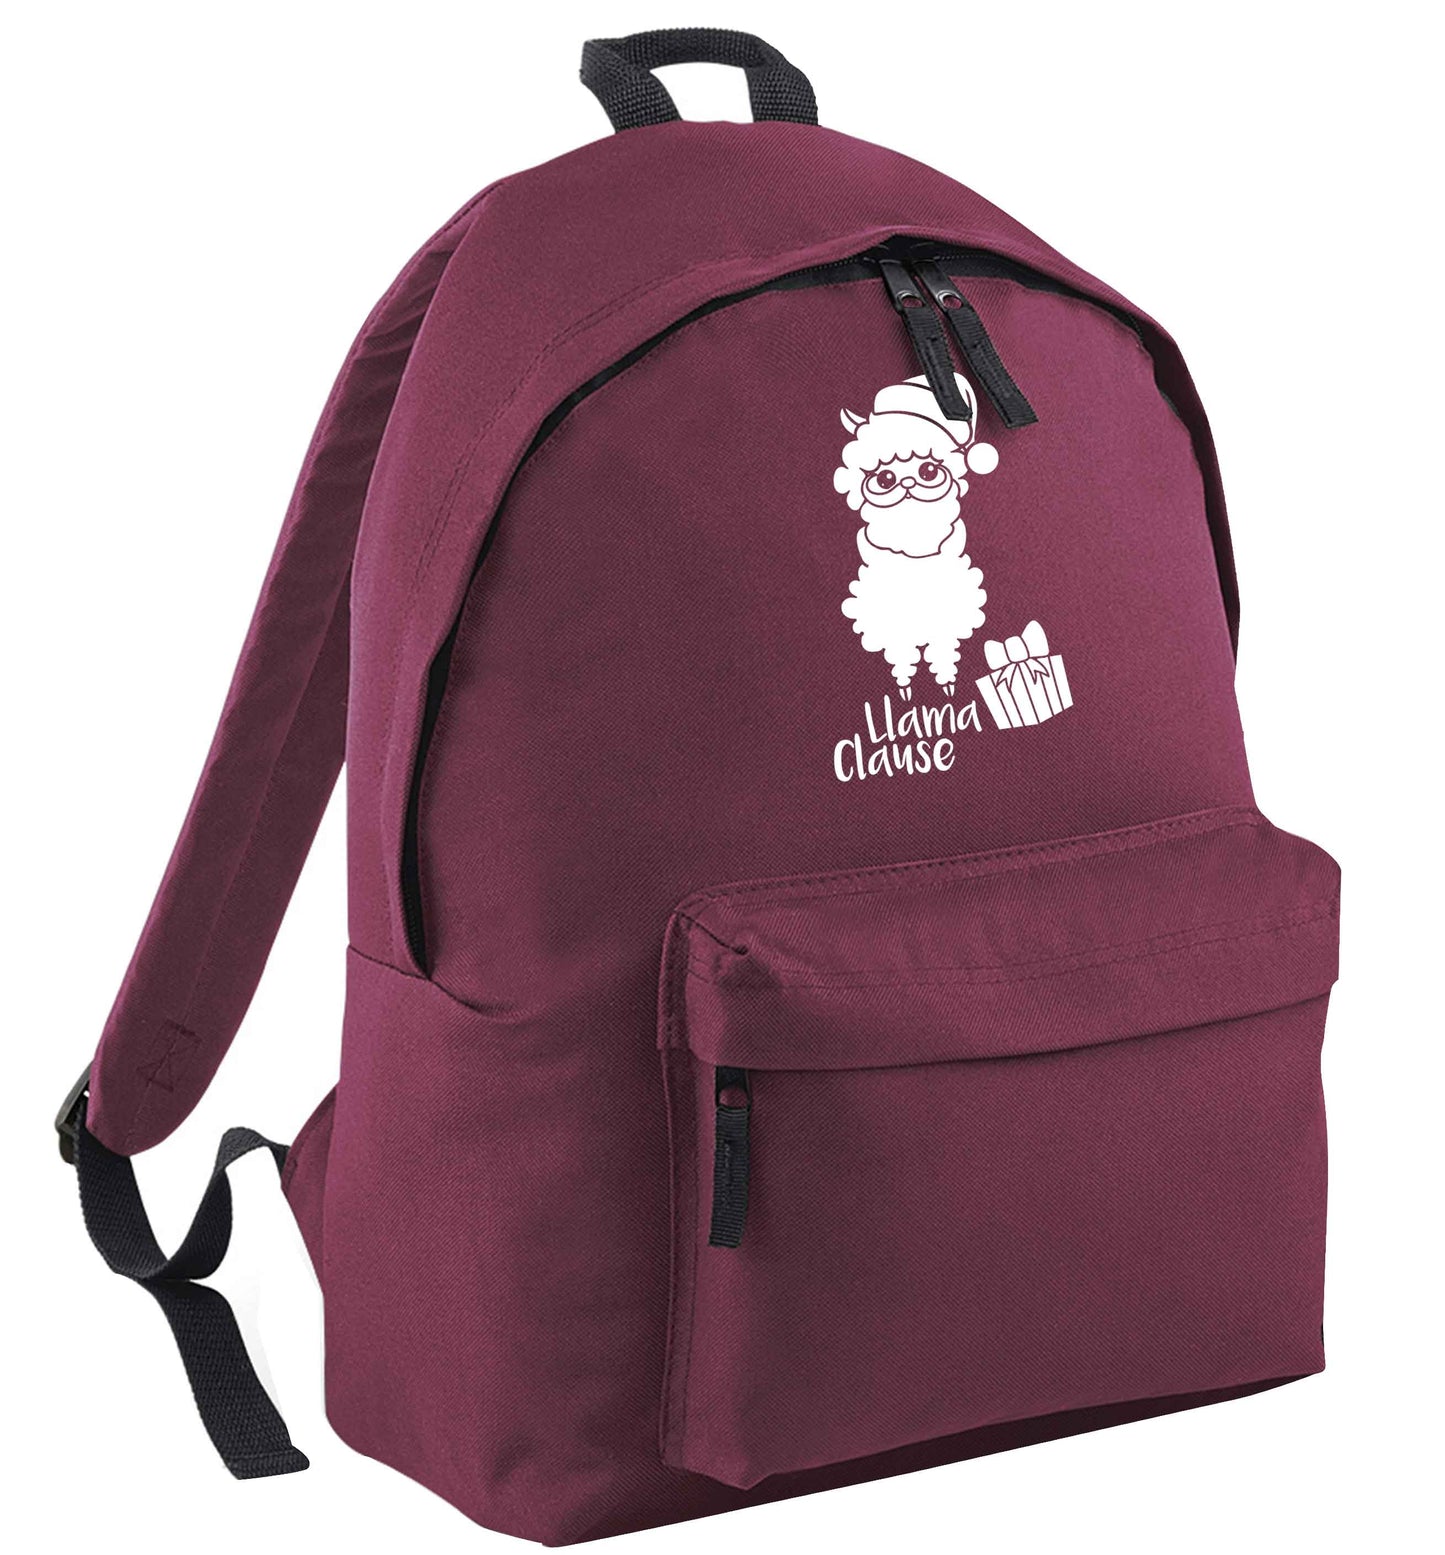 Llama Clause | Children's backpack